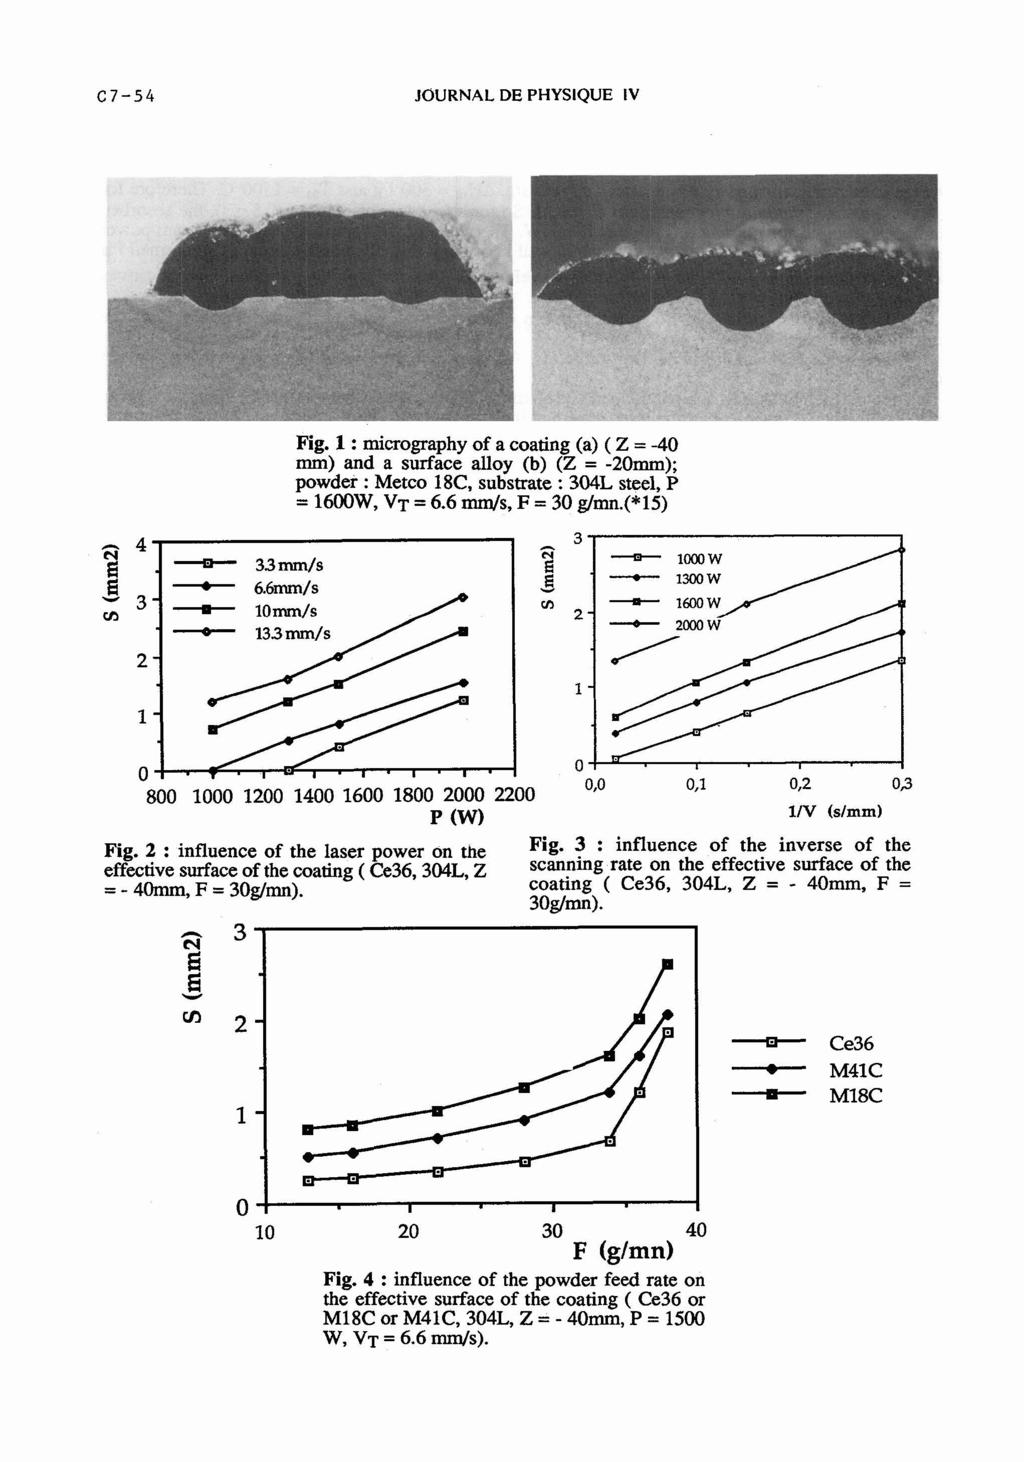 C7-54 JOURNAL DE PHYSIQUE IV Fig. 1 : micrography of a coating (a) ( Z = -40 mm) and a surface alloy (b) (Z = -20mm); powder : Metco 18C, substrate : 304L steel, P = 1600W, VT = 6.6 mm/s, F = 30 glmn.